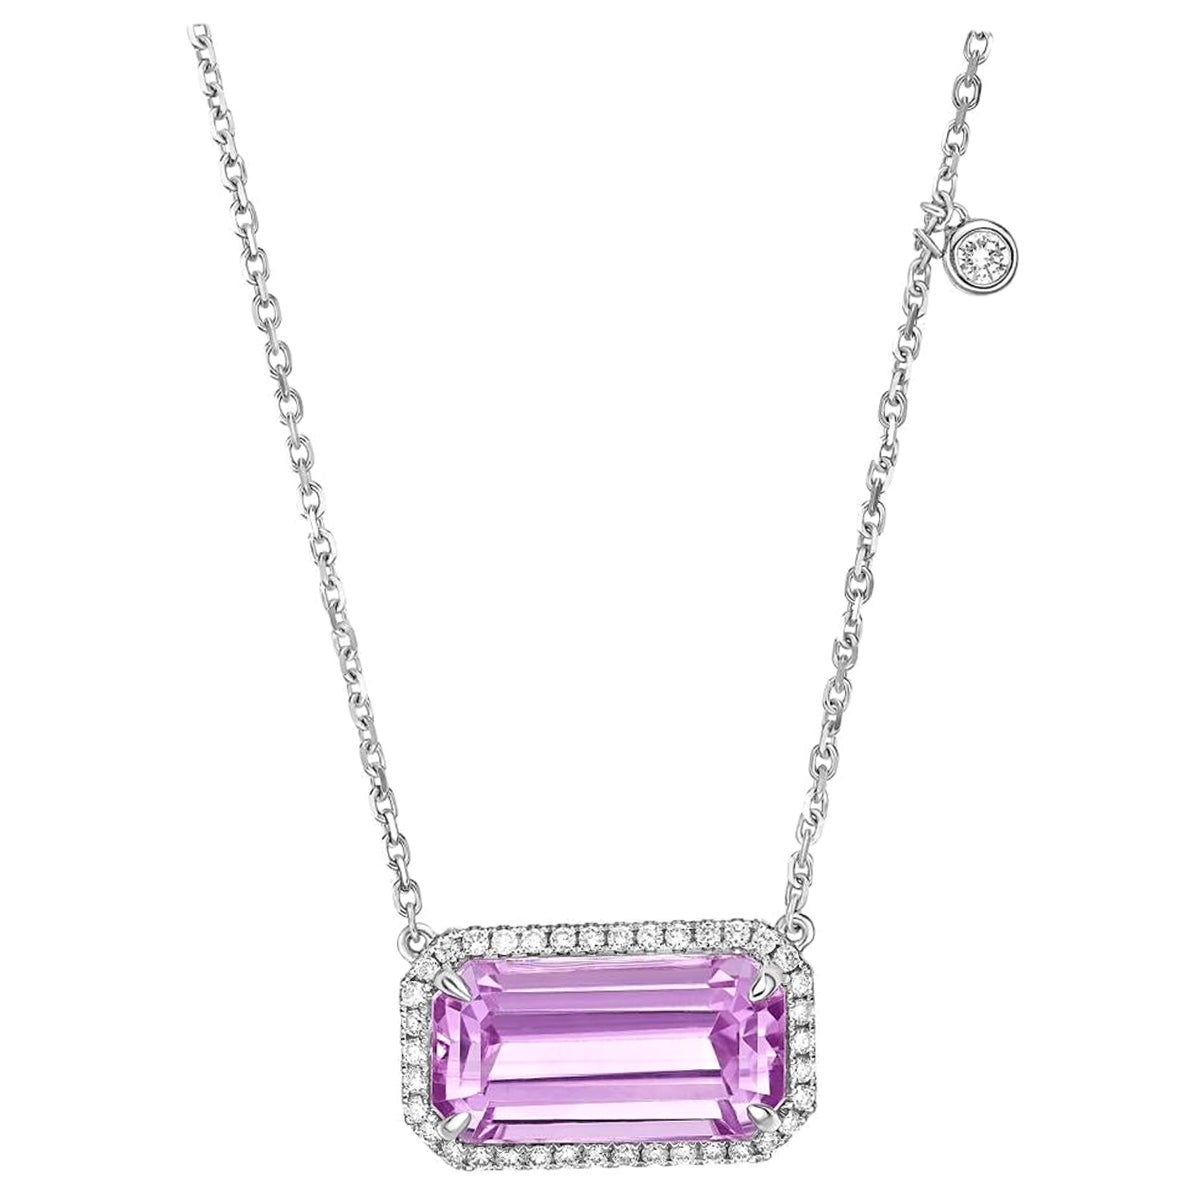 Gilin 18k White Gold Diamond Necklace with Kunzite For Sale